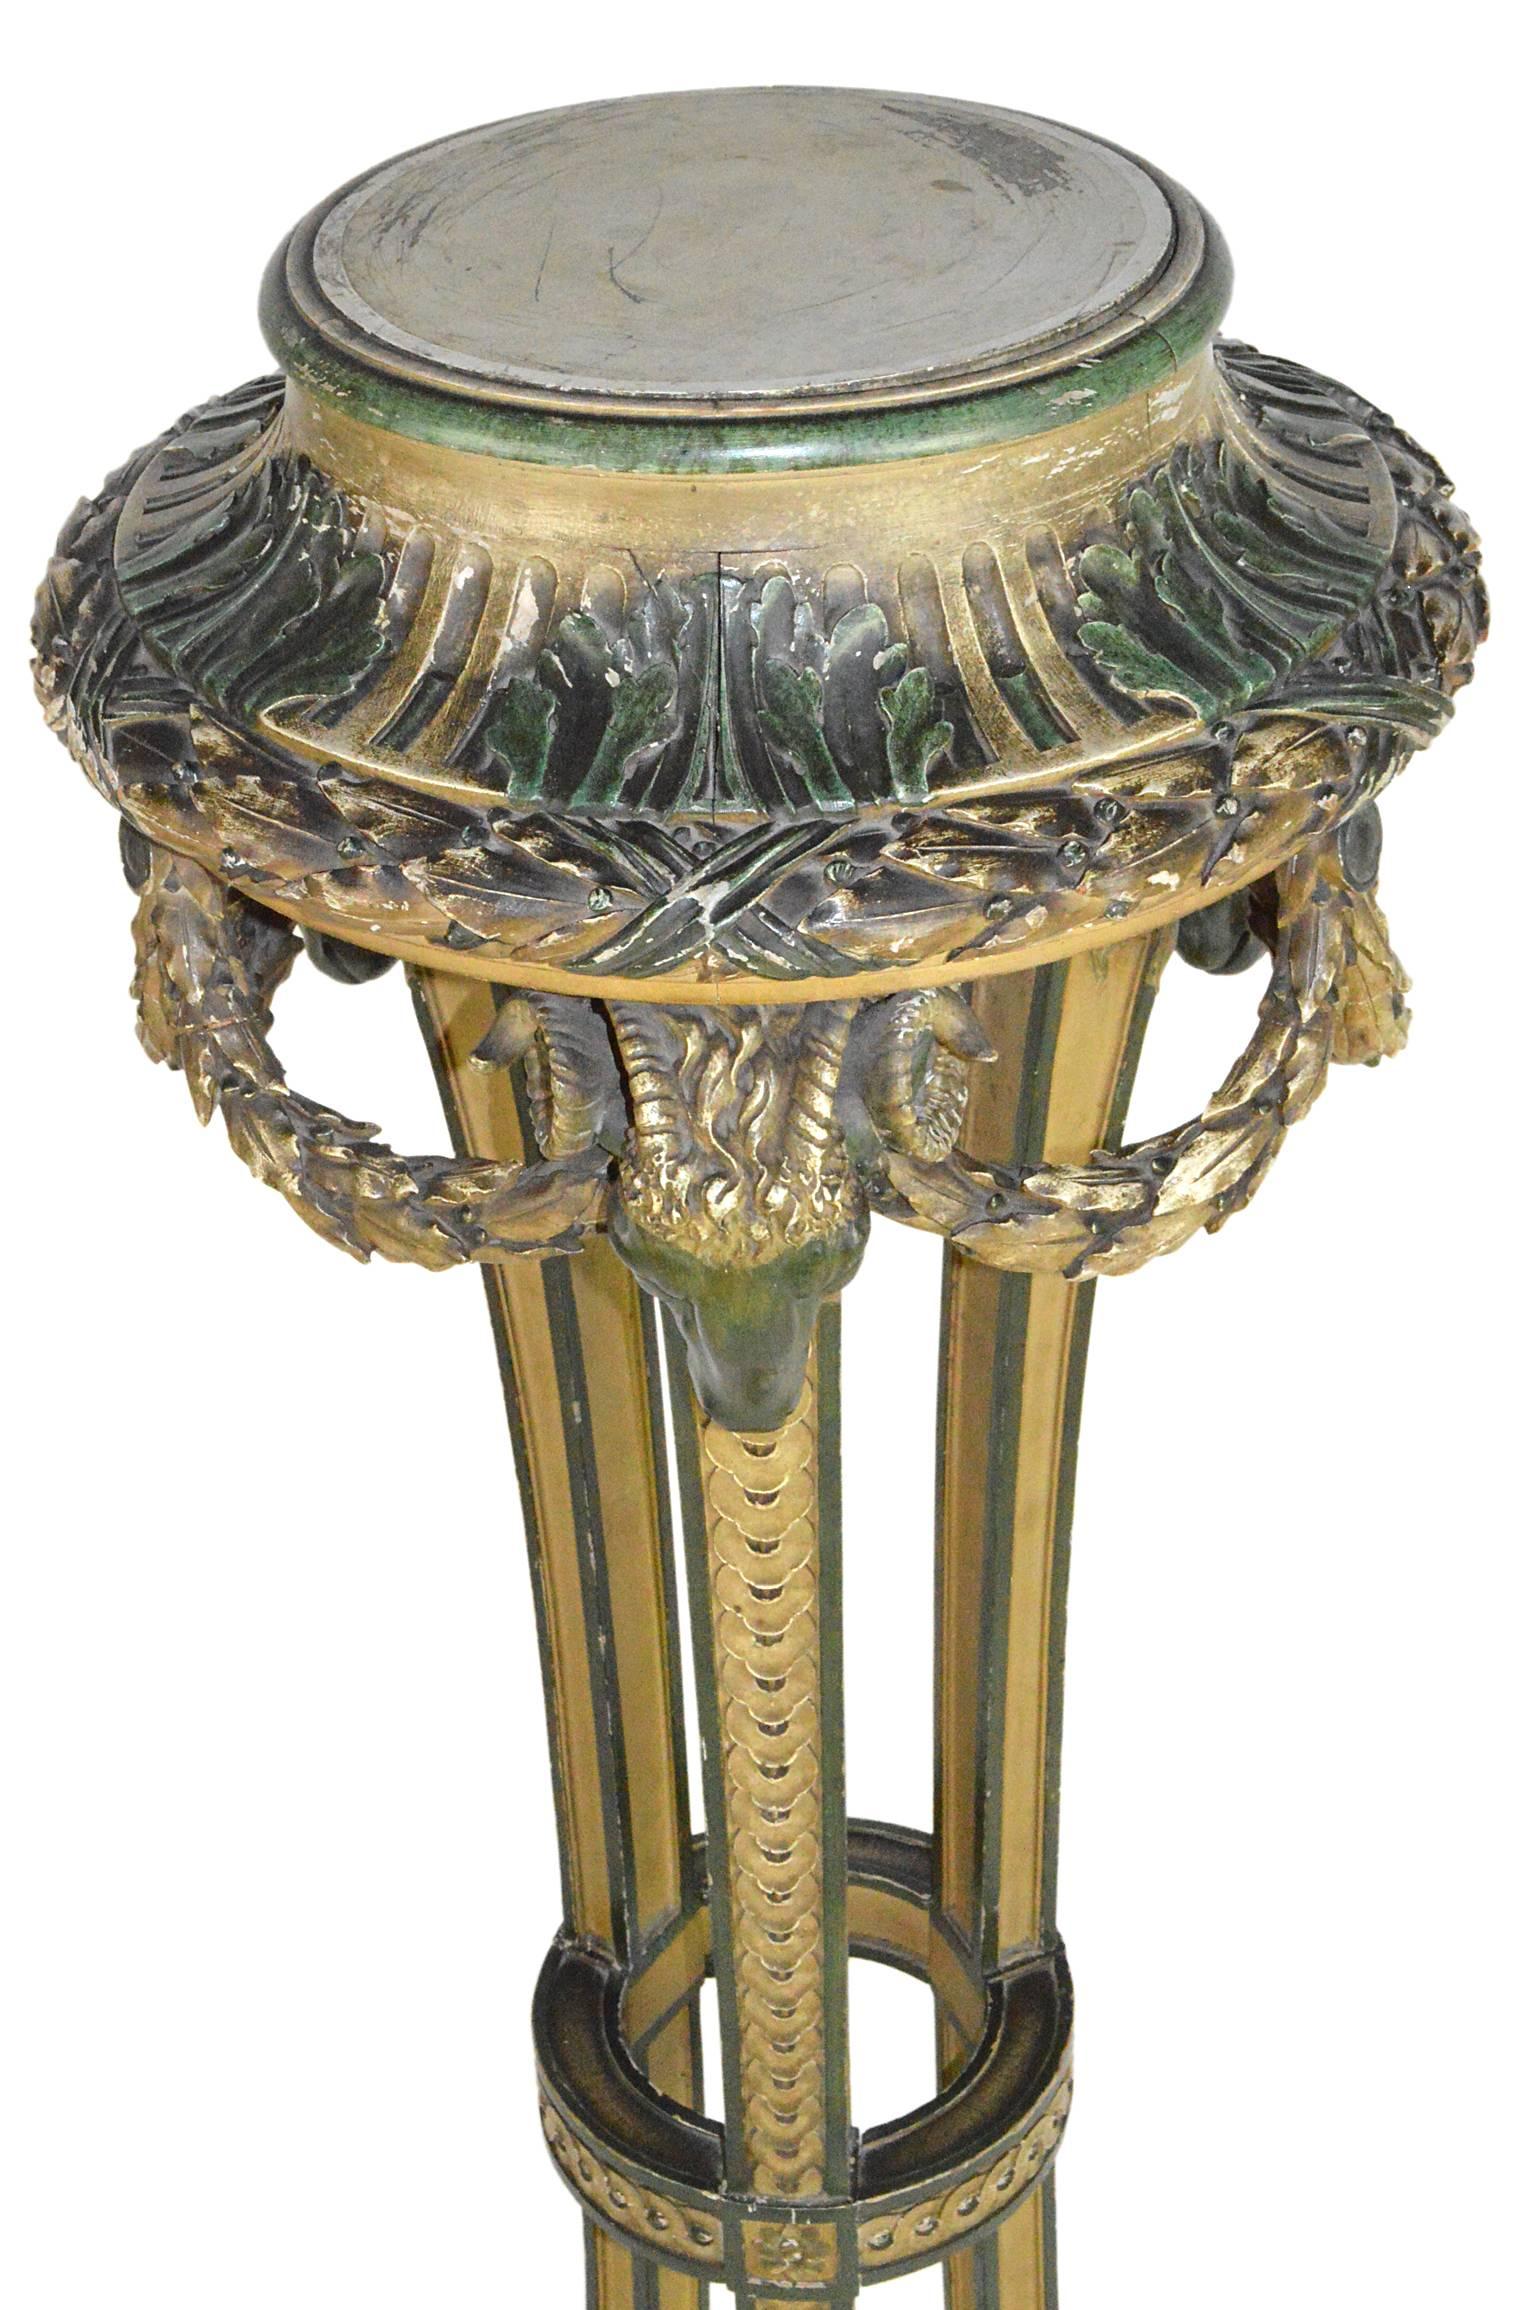 Louis XV style French painted pedestal having rams heads, ornate foliate designs ending in hoofed feet on tripartite base.
       